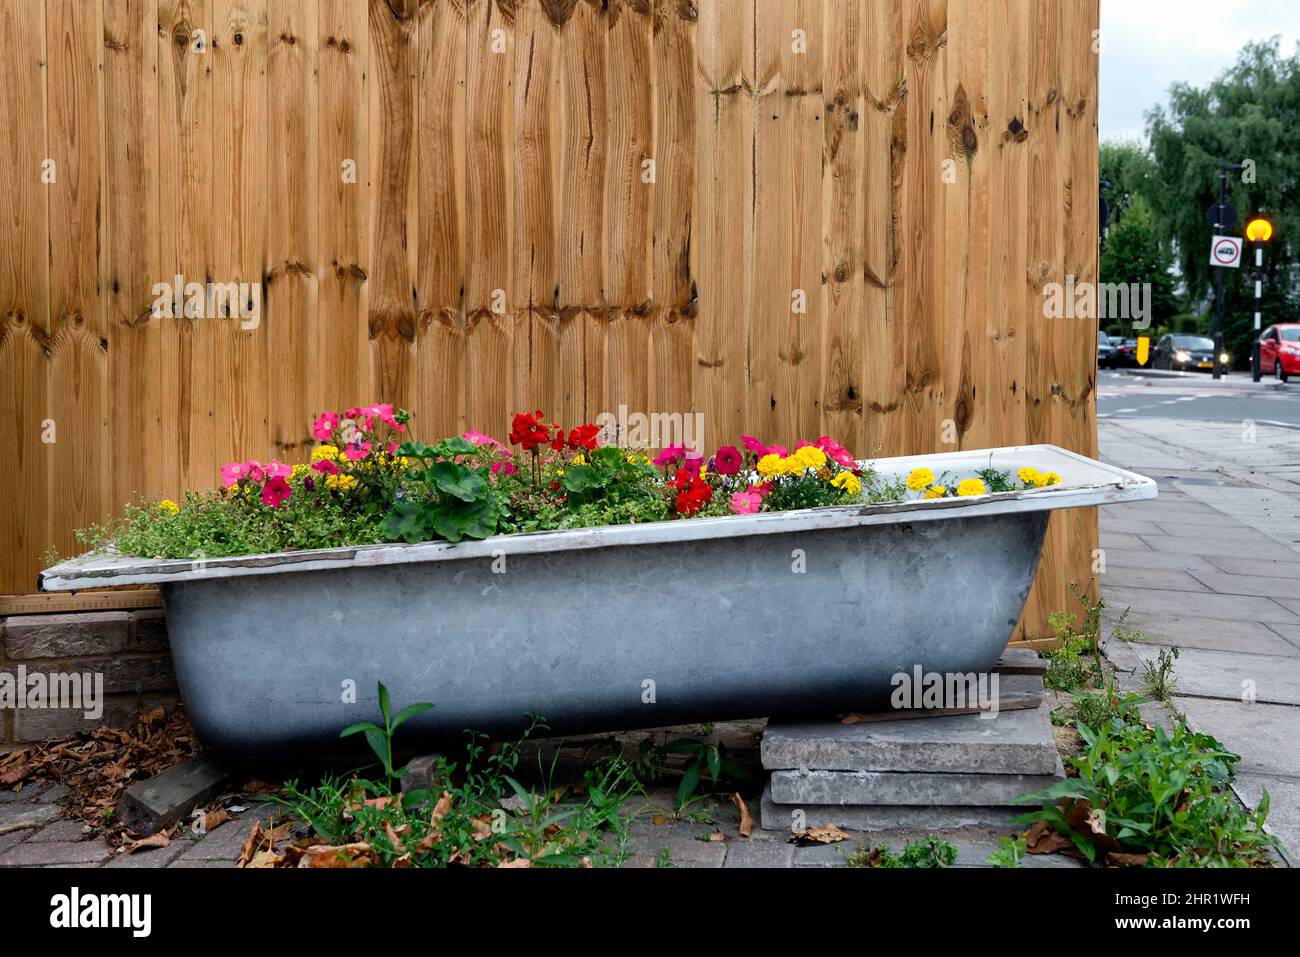 Colourful flowers and plants in old bathtub recycled as big pot Stock Photo